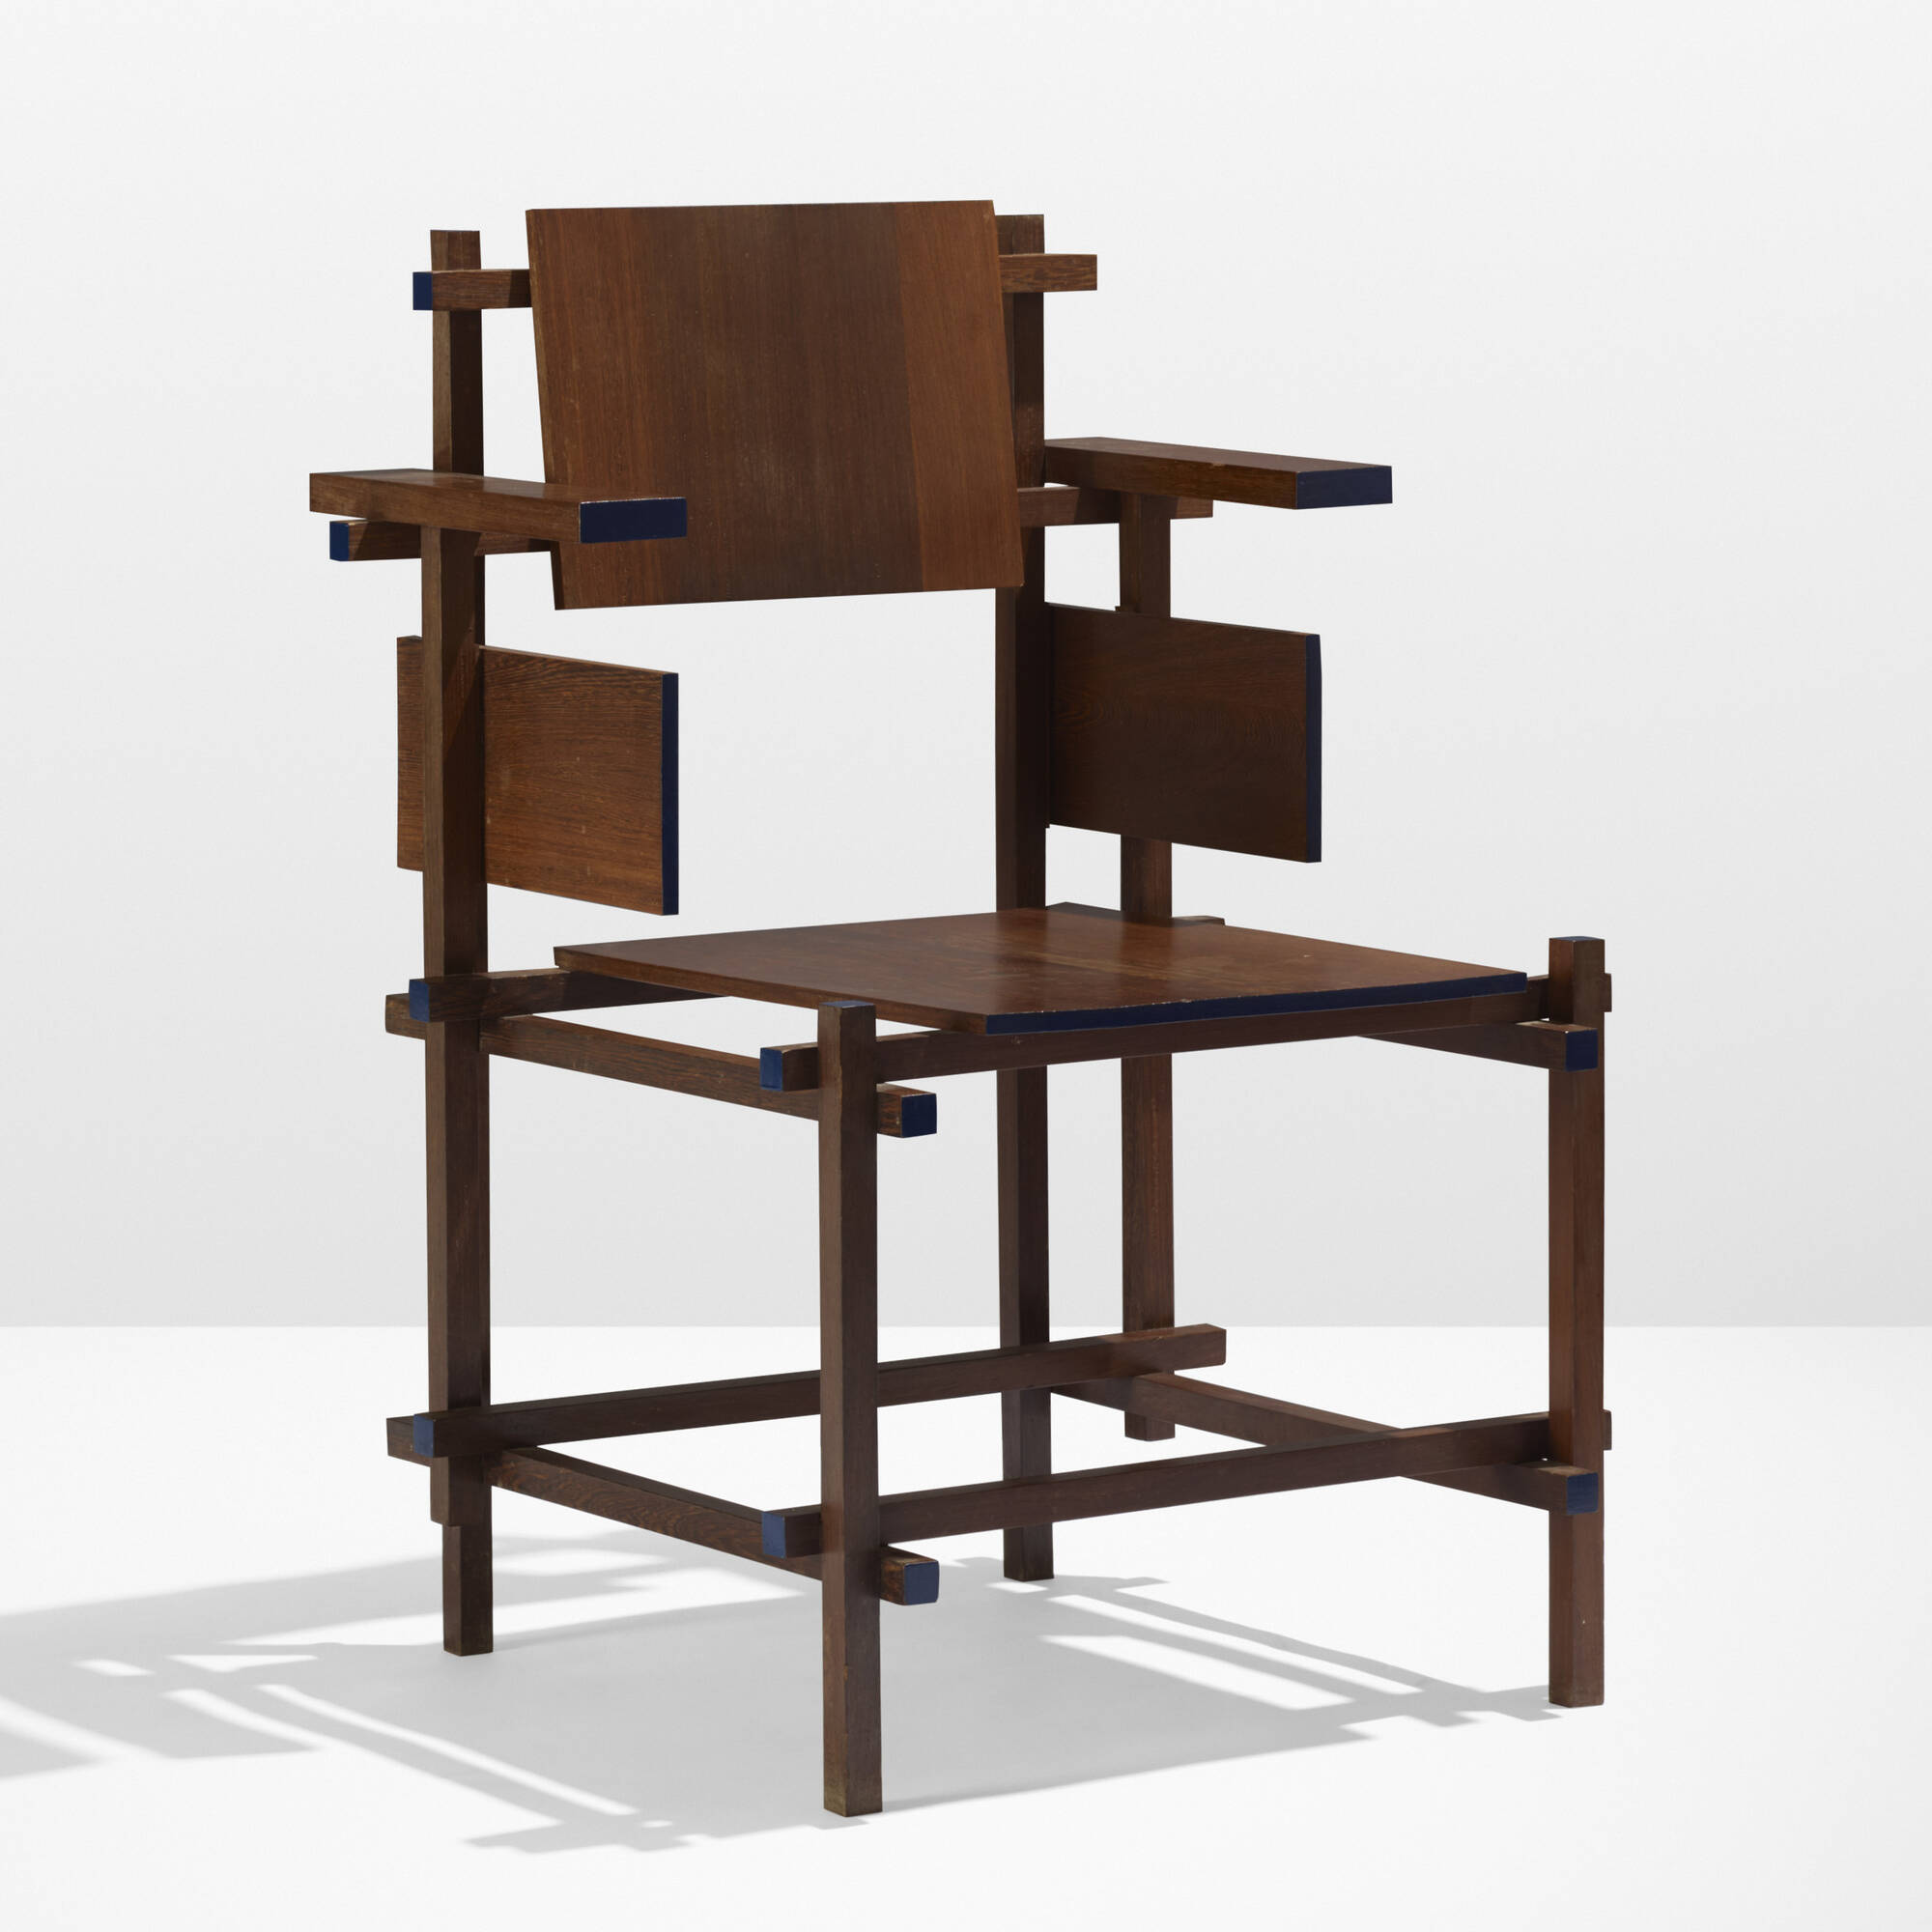 mechanisme Kabelbaan begroting 107: GERRIT RIETVELD, Hoge Stoel < International Style: The Boyd  Collection, 7 November 2019 < Auctions | Wright: Auctions of Art and Design